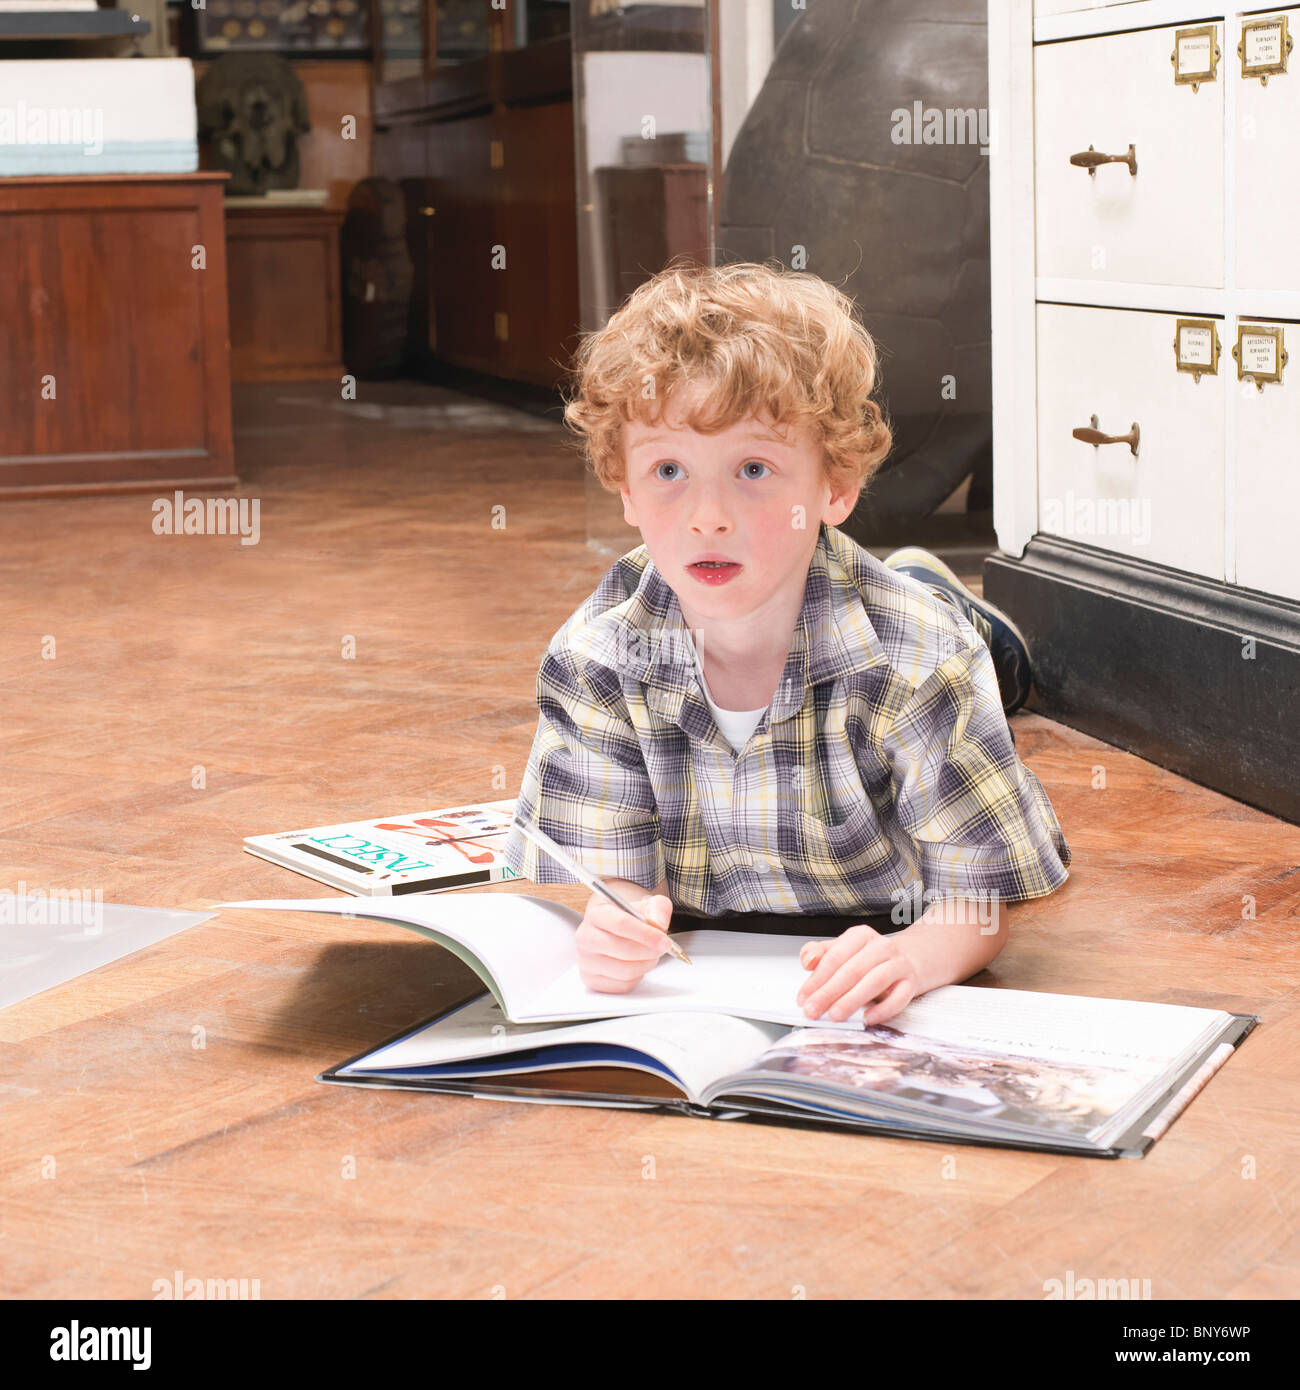 Boy looking up from book and note pad Stock Photo